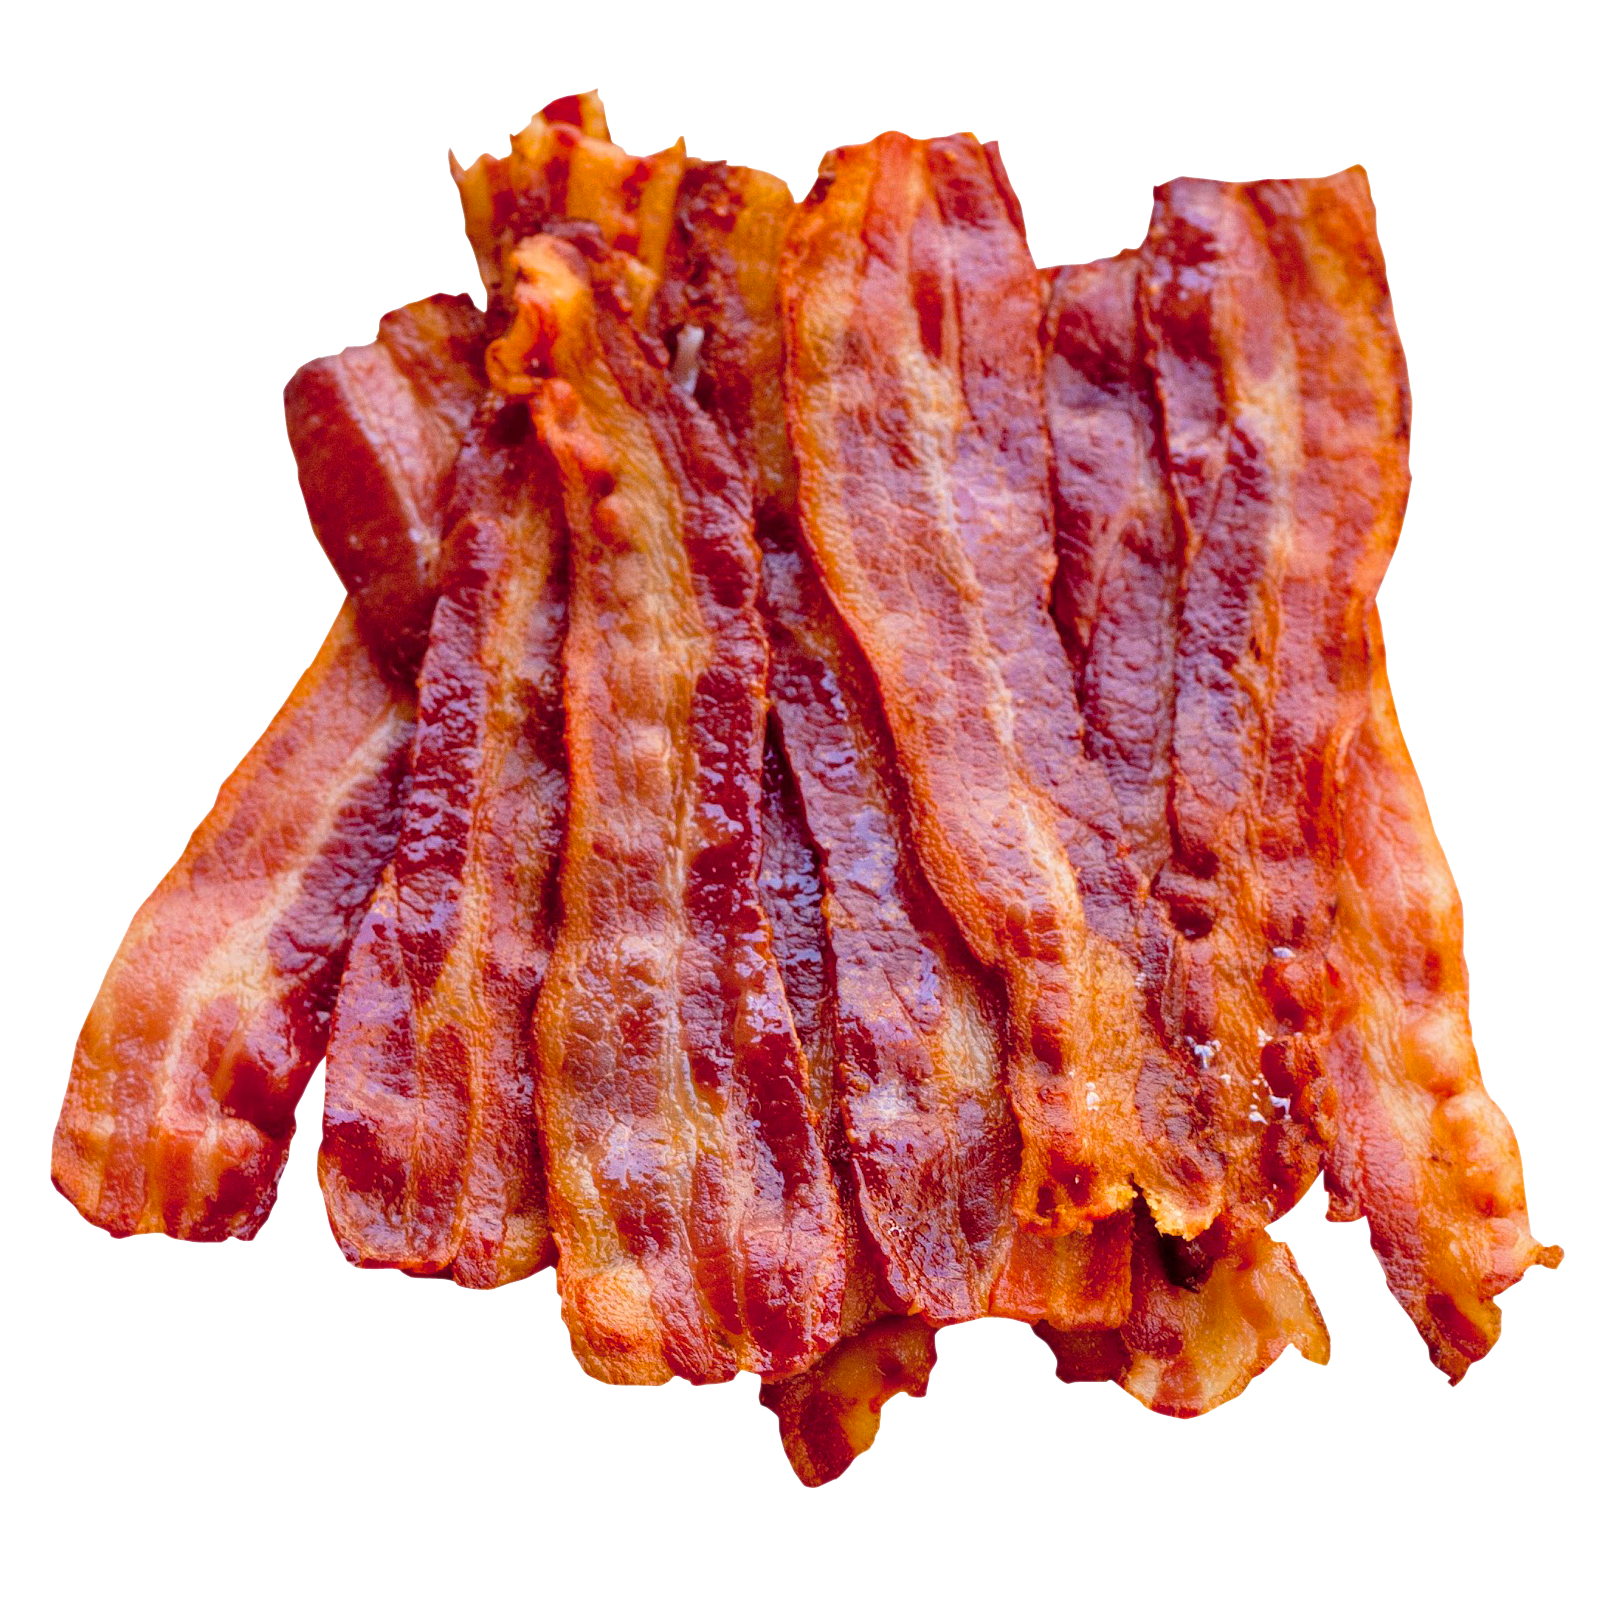 Hdpng   Bacon Png - Bacon, Transparent background PNG HD thumbnail